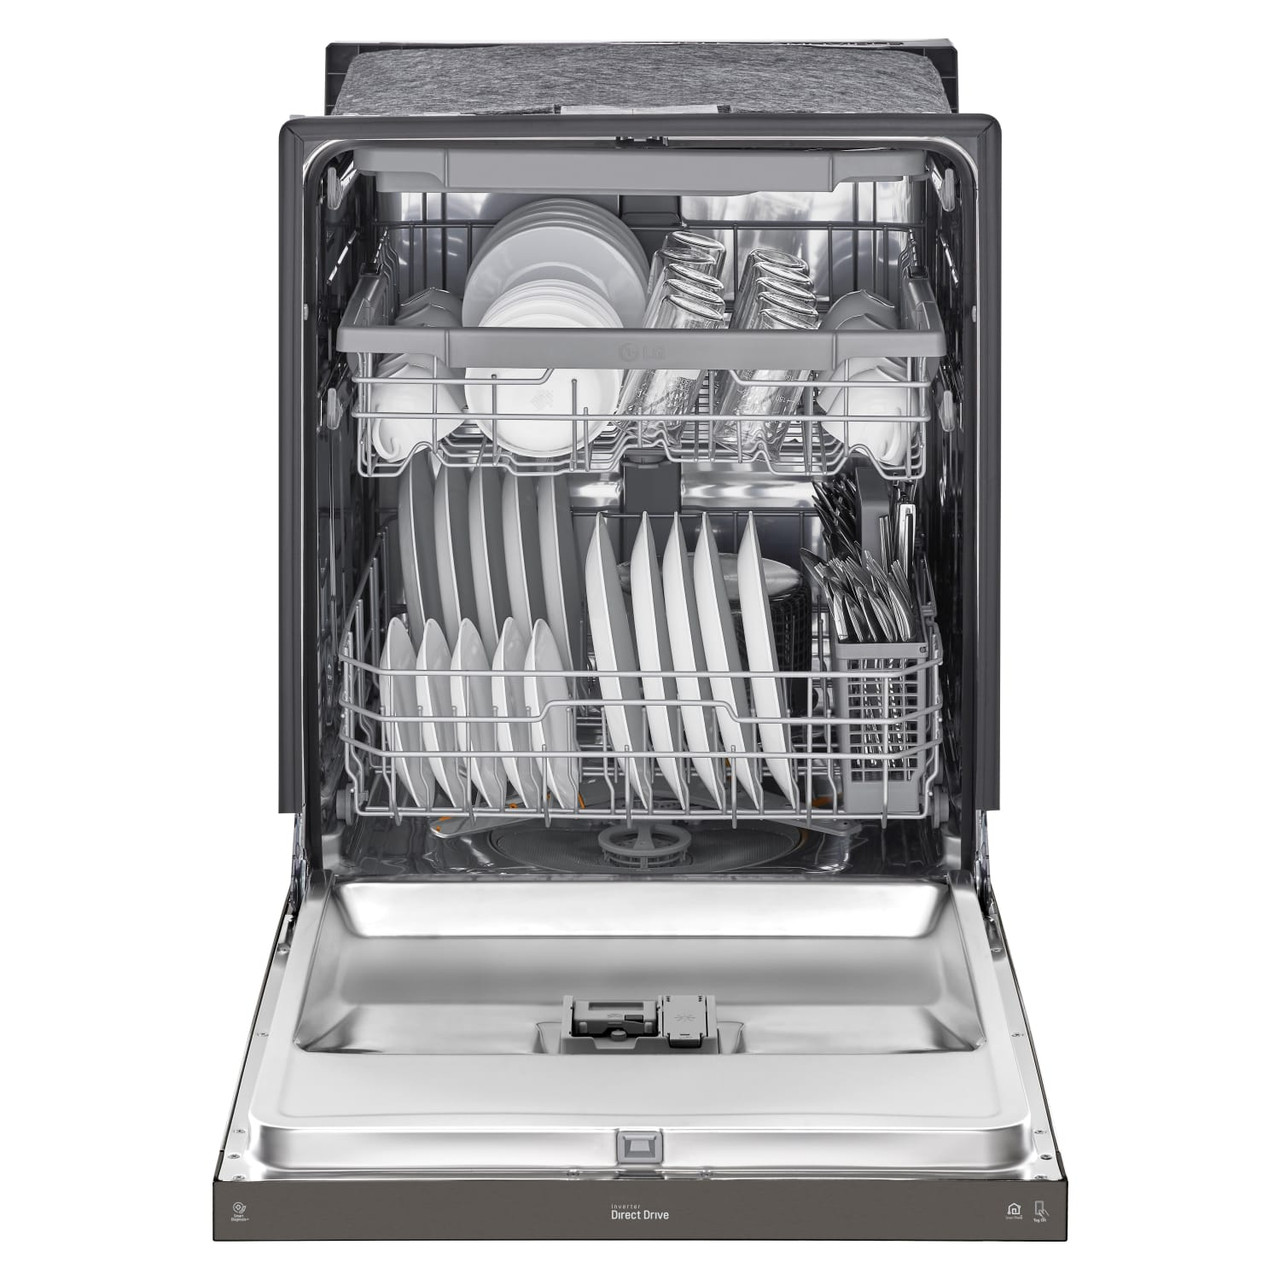 LG Front Control Dishwasher with QuadWash and 3rd Rack - LDFN4542D